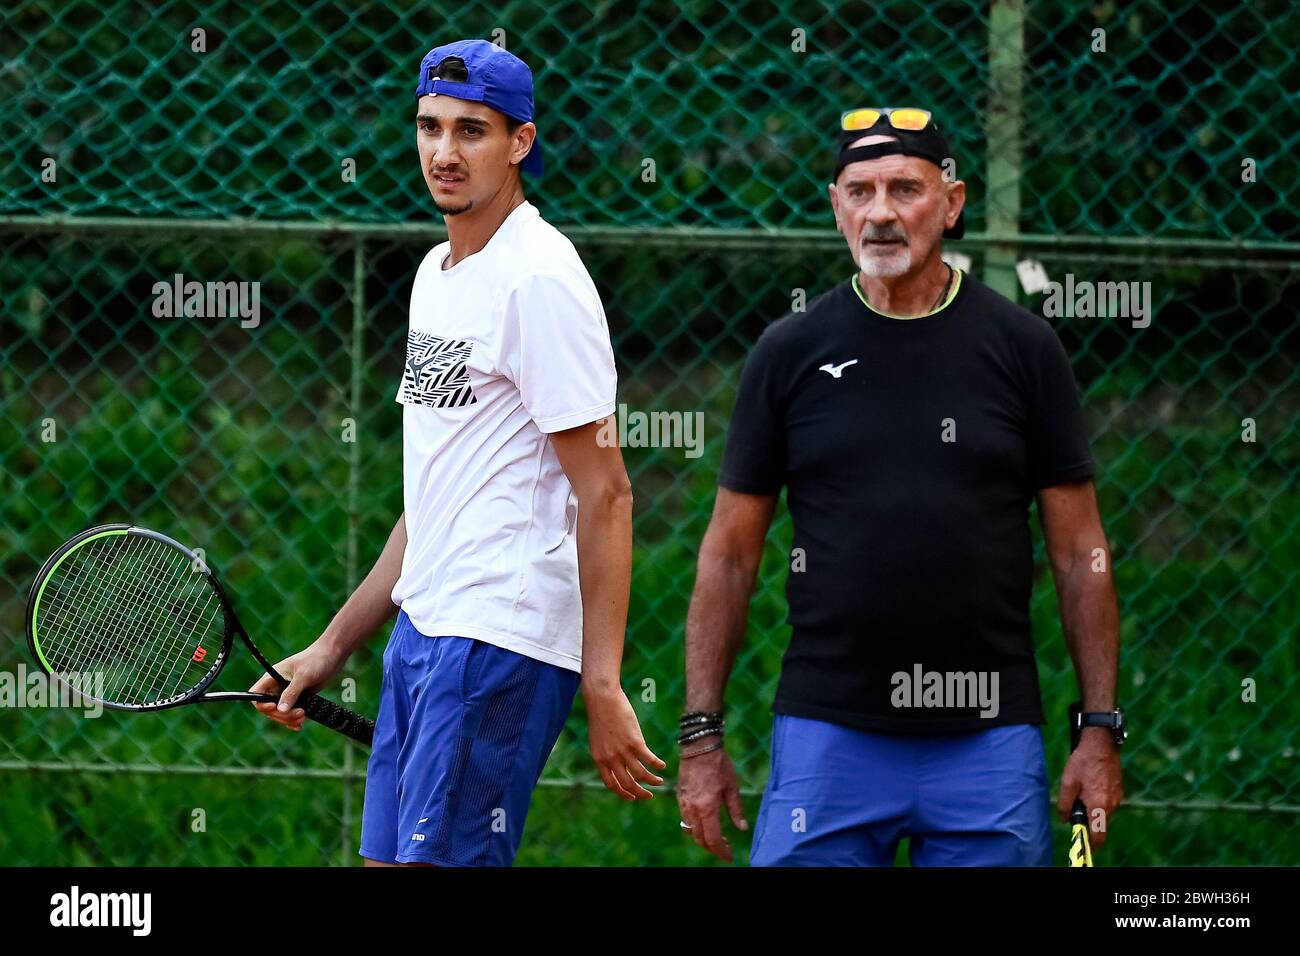 Turin, Italy - 01 June, 2020: Lorenzo Sonego (L), currently number 46 of ATP  ranking, and his coach Gipo Arbino look on during a tennis training.  Athletes have started training again after